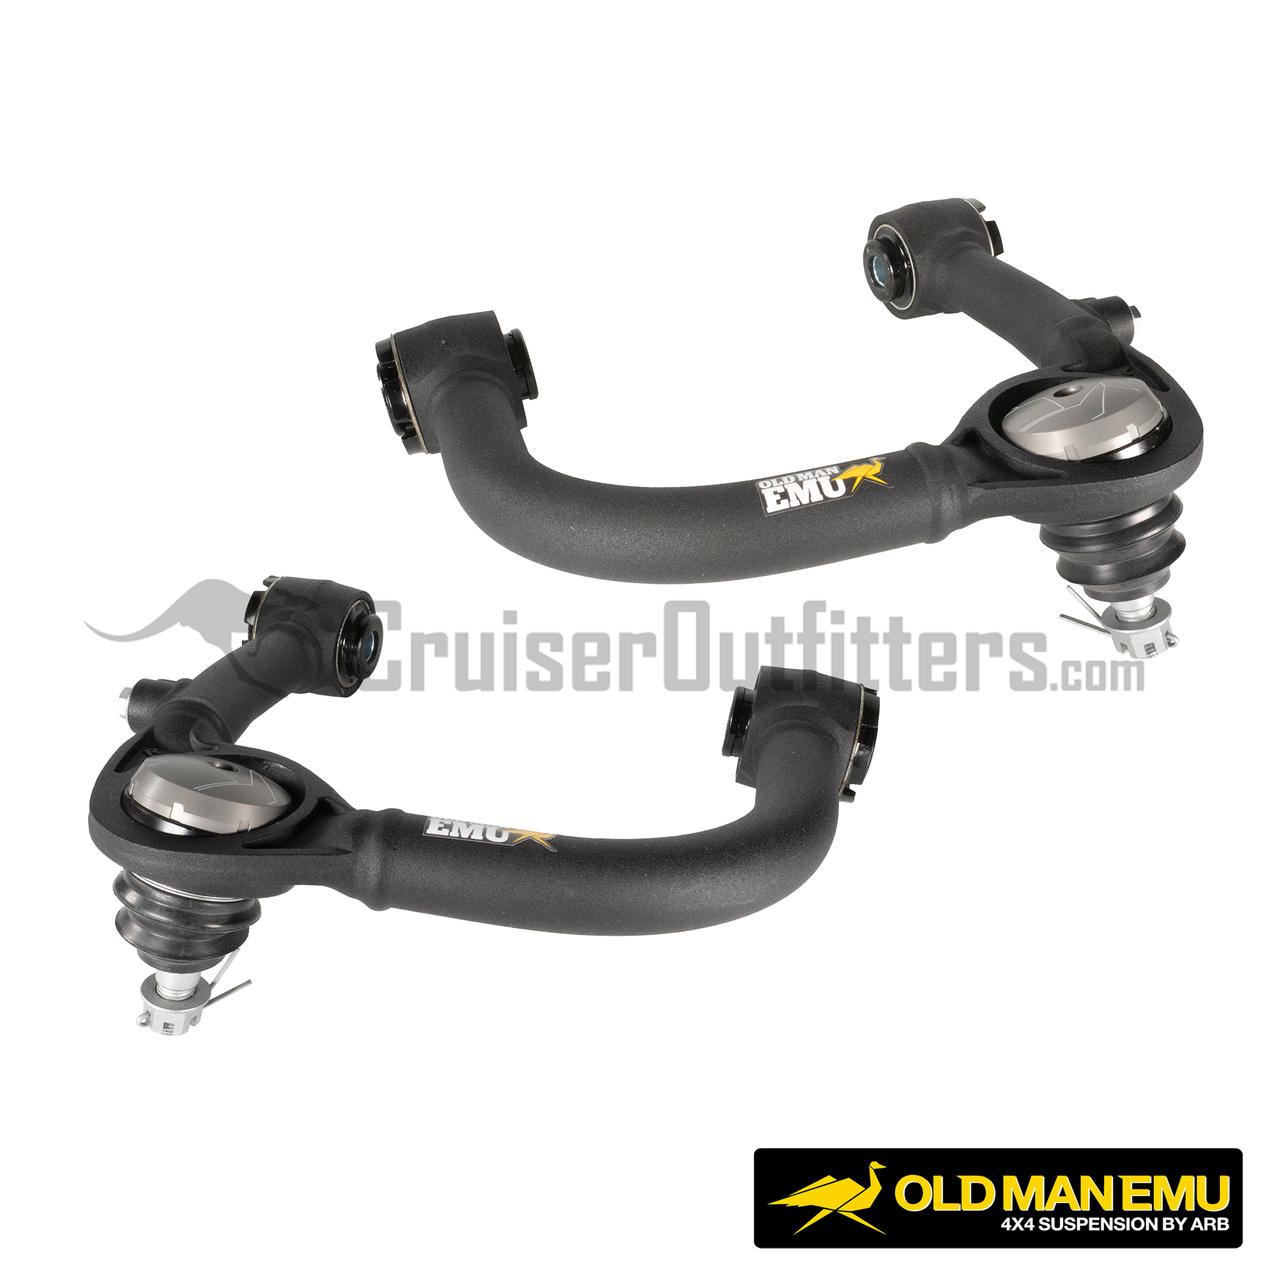 Front Upper Control Arms (Pair) - Fits 1998-2007 100/LX470 Applications (OME UCA0010)